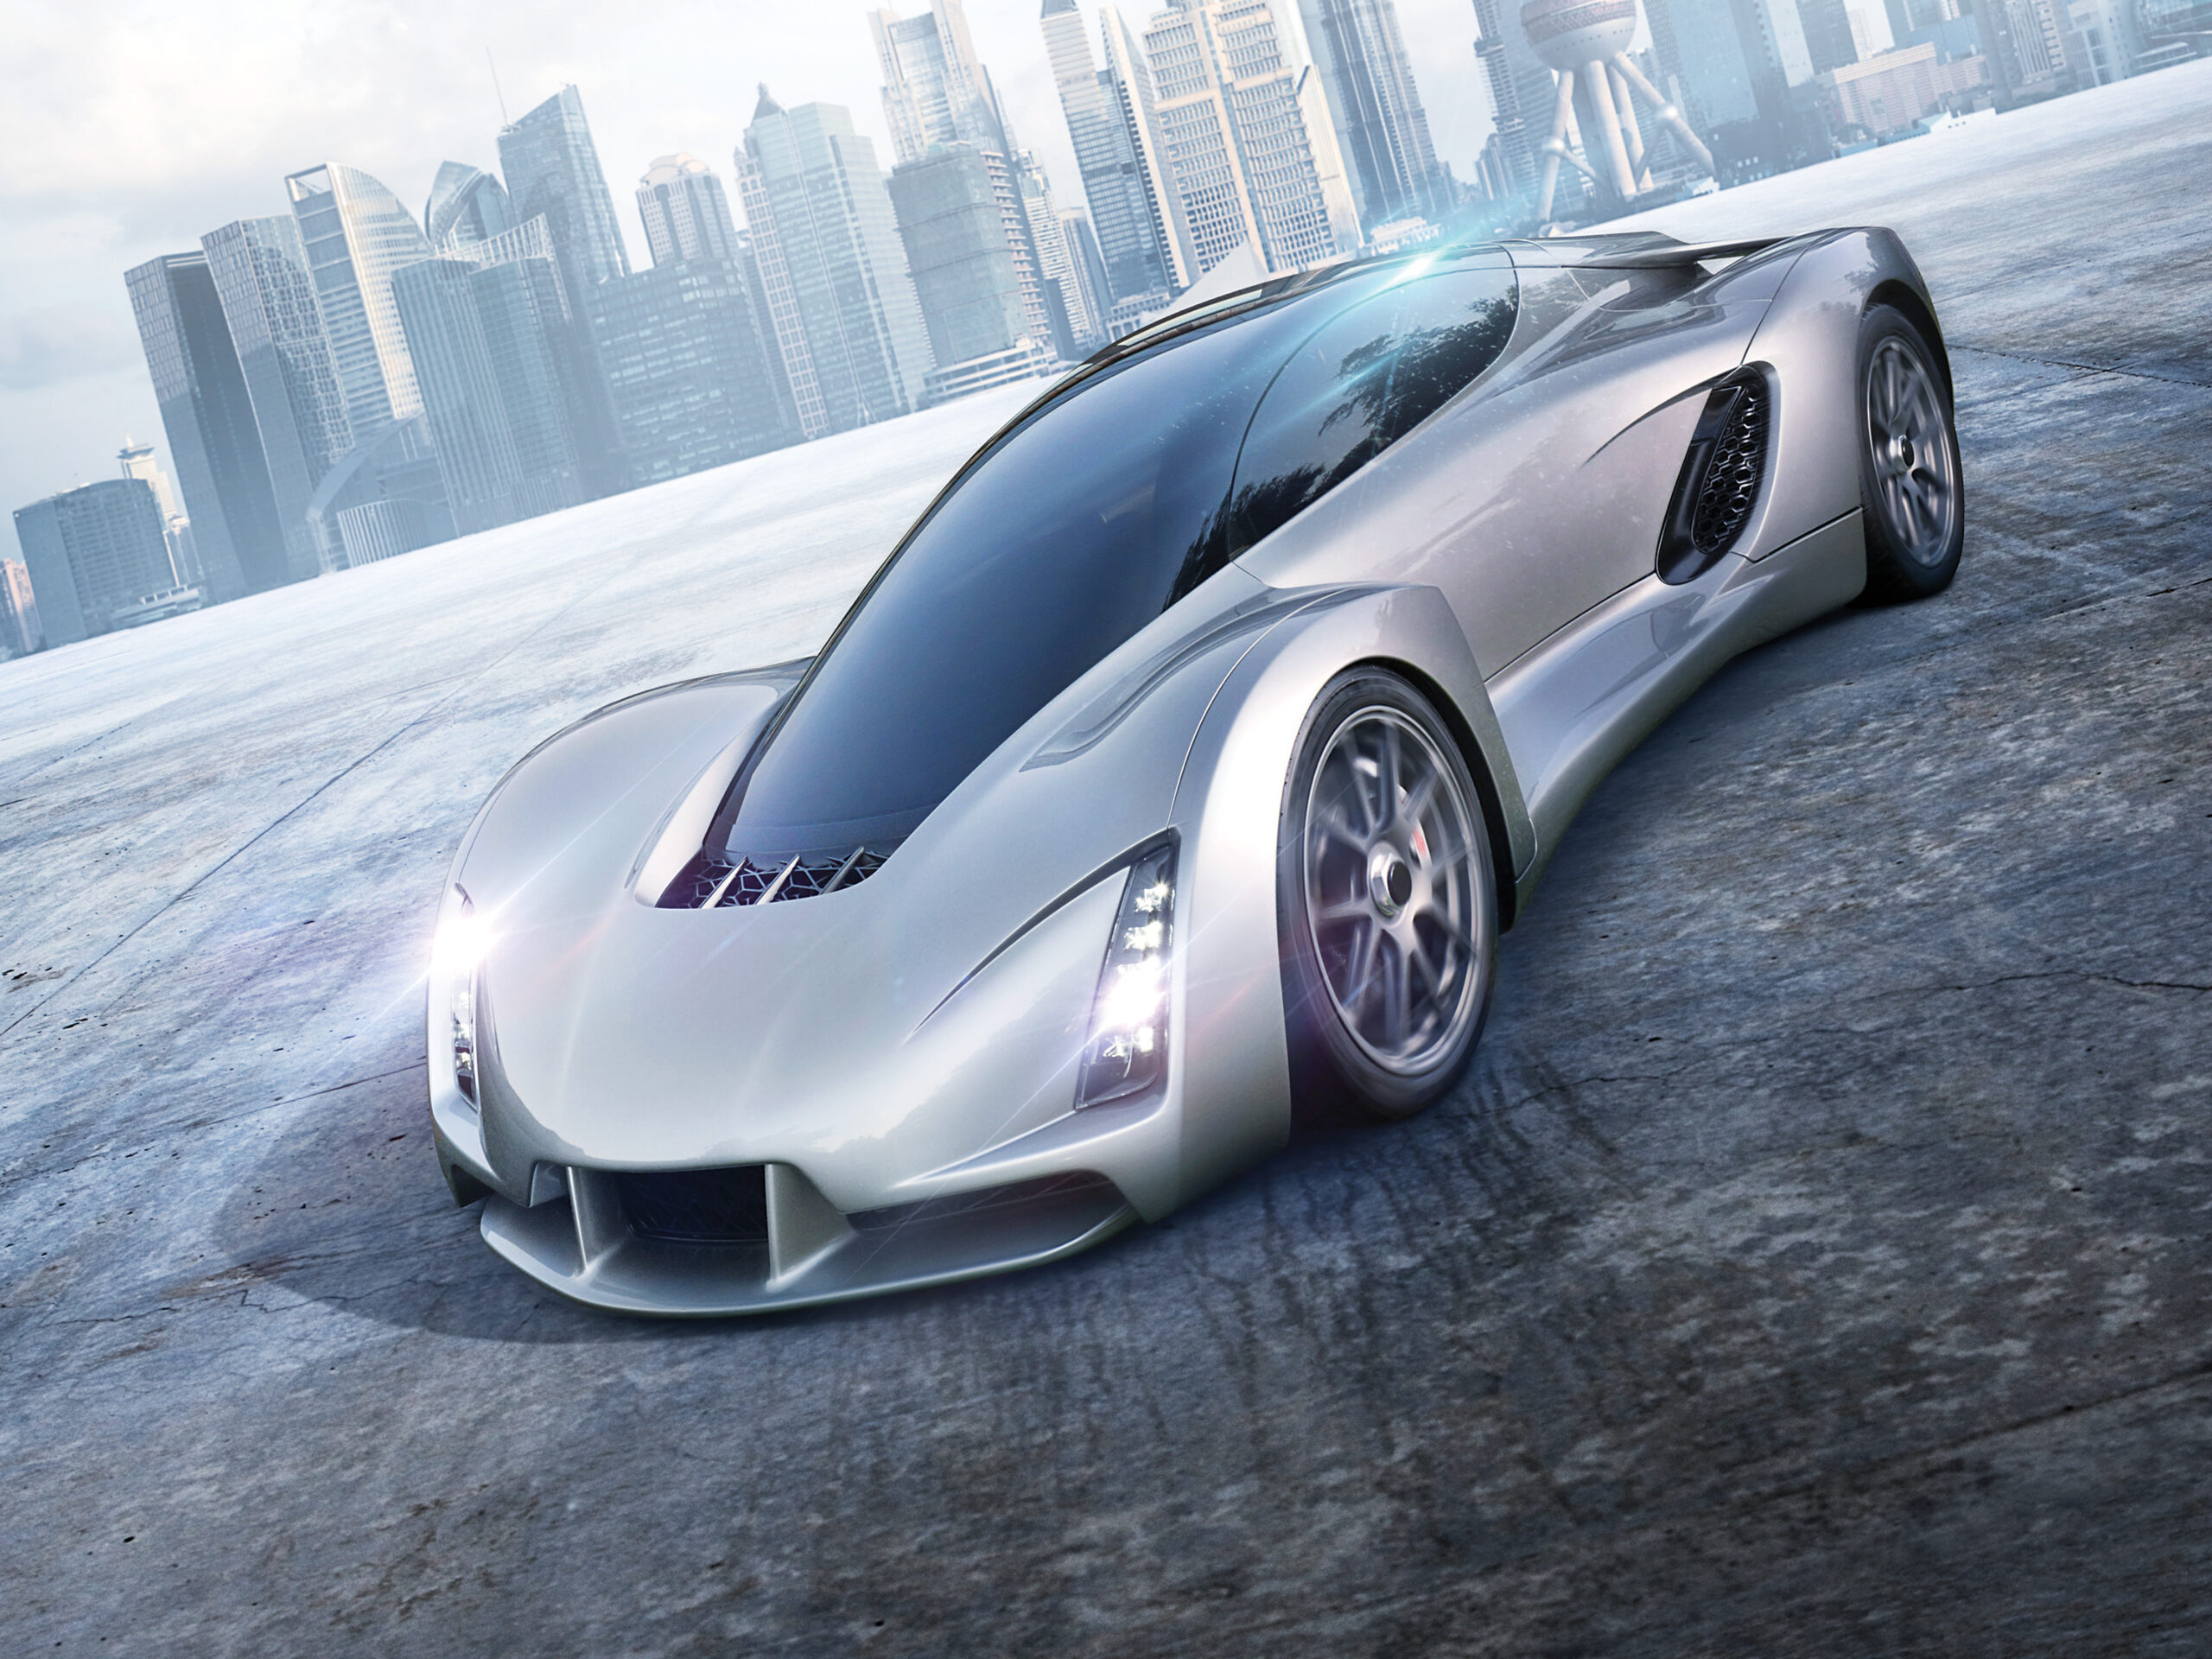 3D-Printed Supercars Will Cut Costs And Emissions